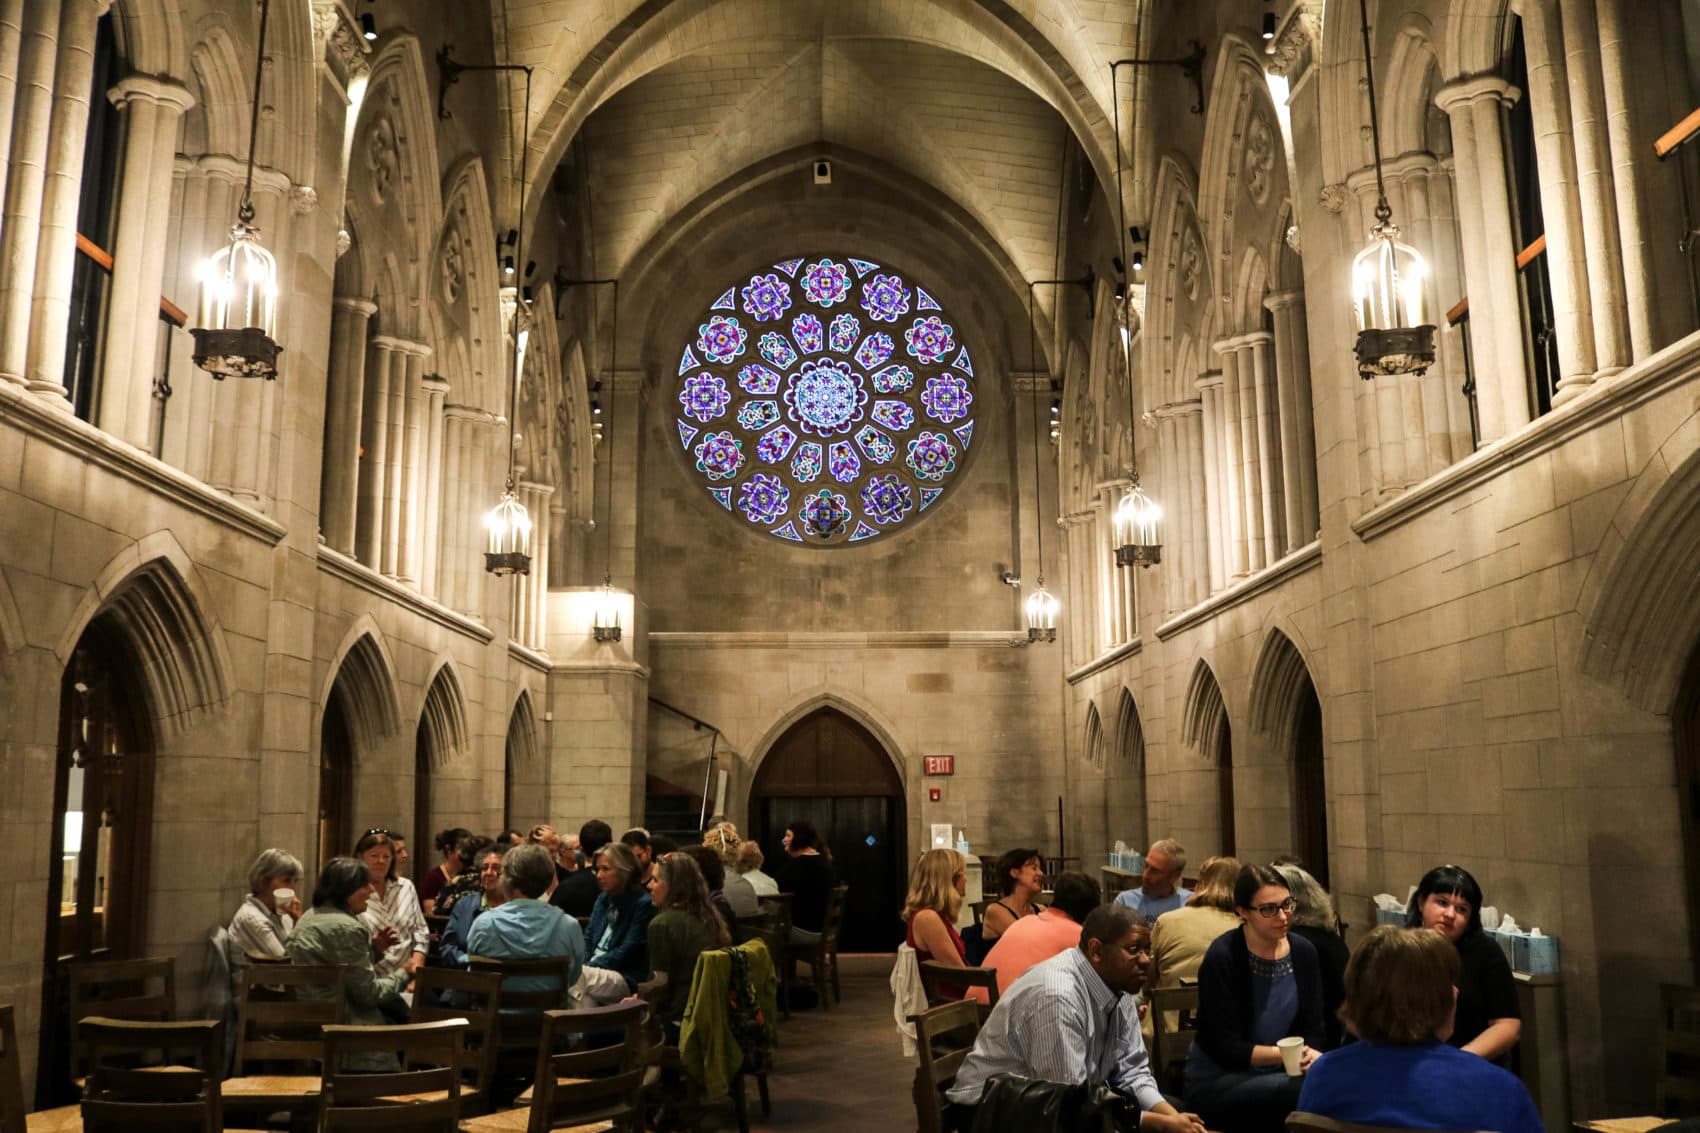 At a death cafe inside Bigelow Chapel at Mount Auburn Cemetery, people gather to enjoy cake and tea while discussing death and mortality in a safe space. (Olivia Deng for WBUR)